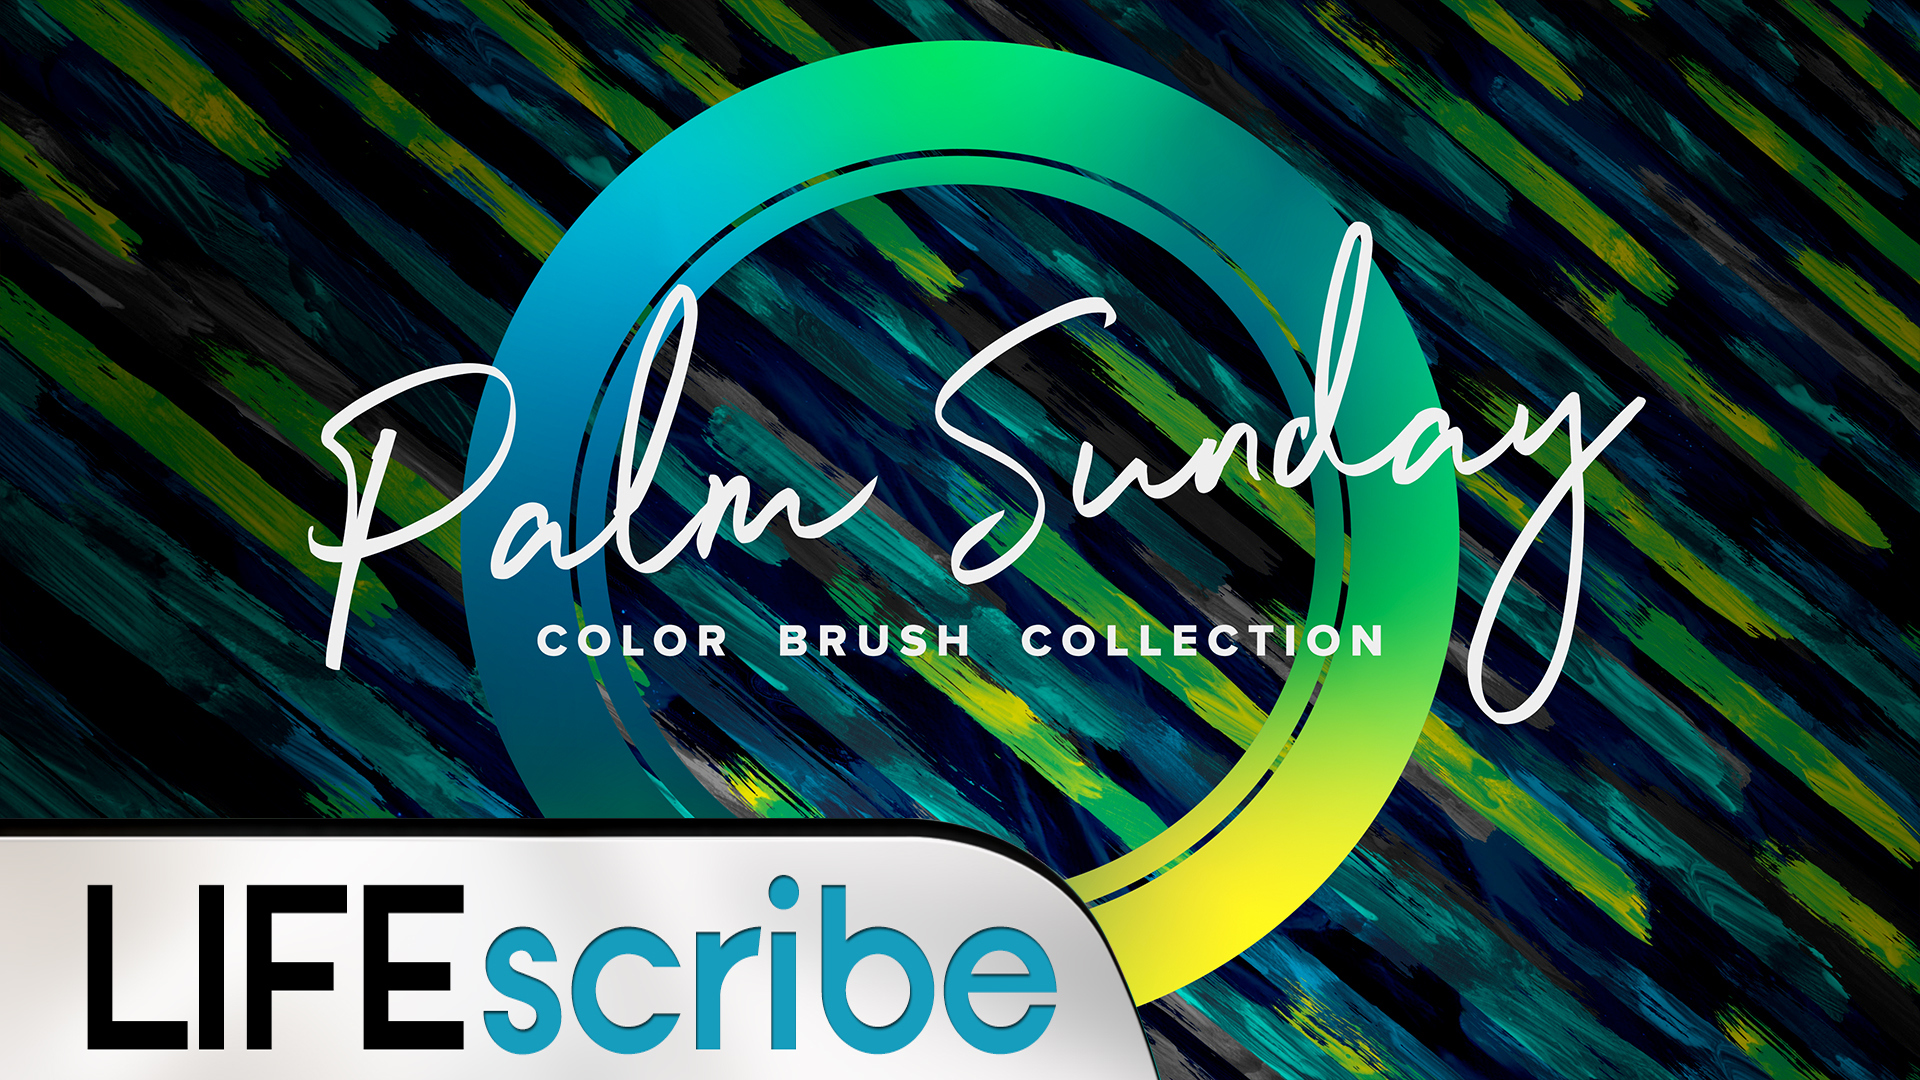 Palm Sunday Color Brush Collection